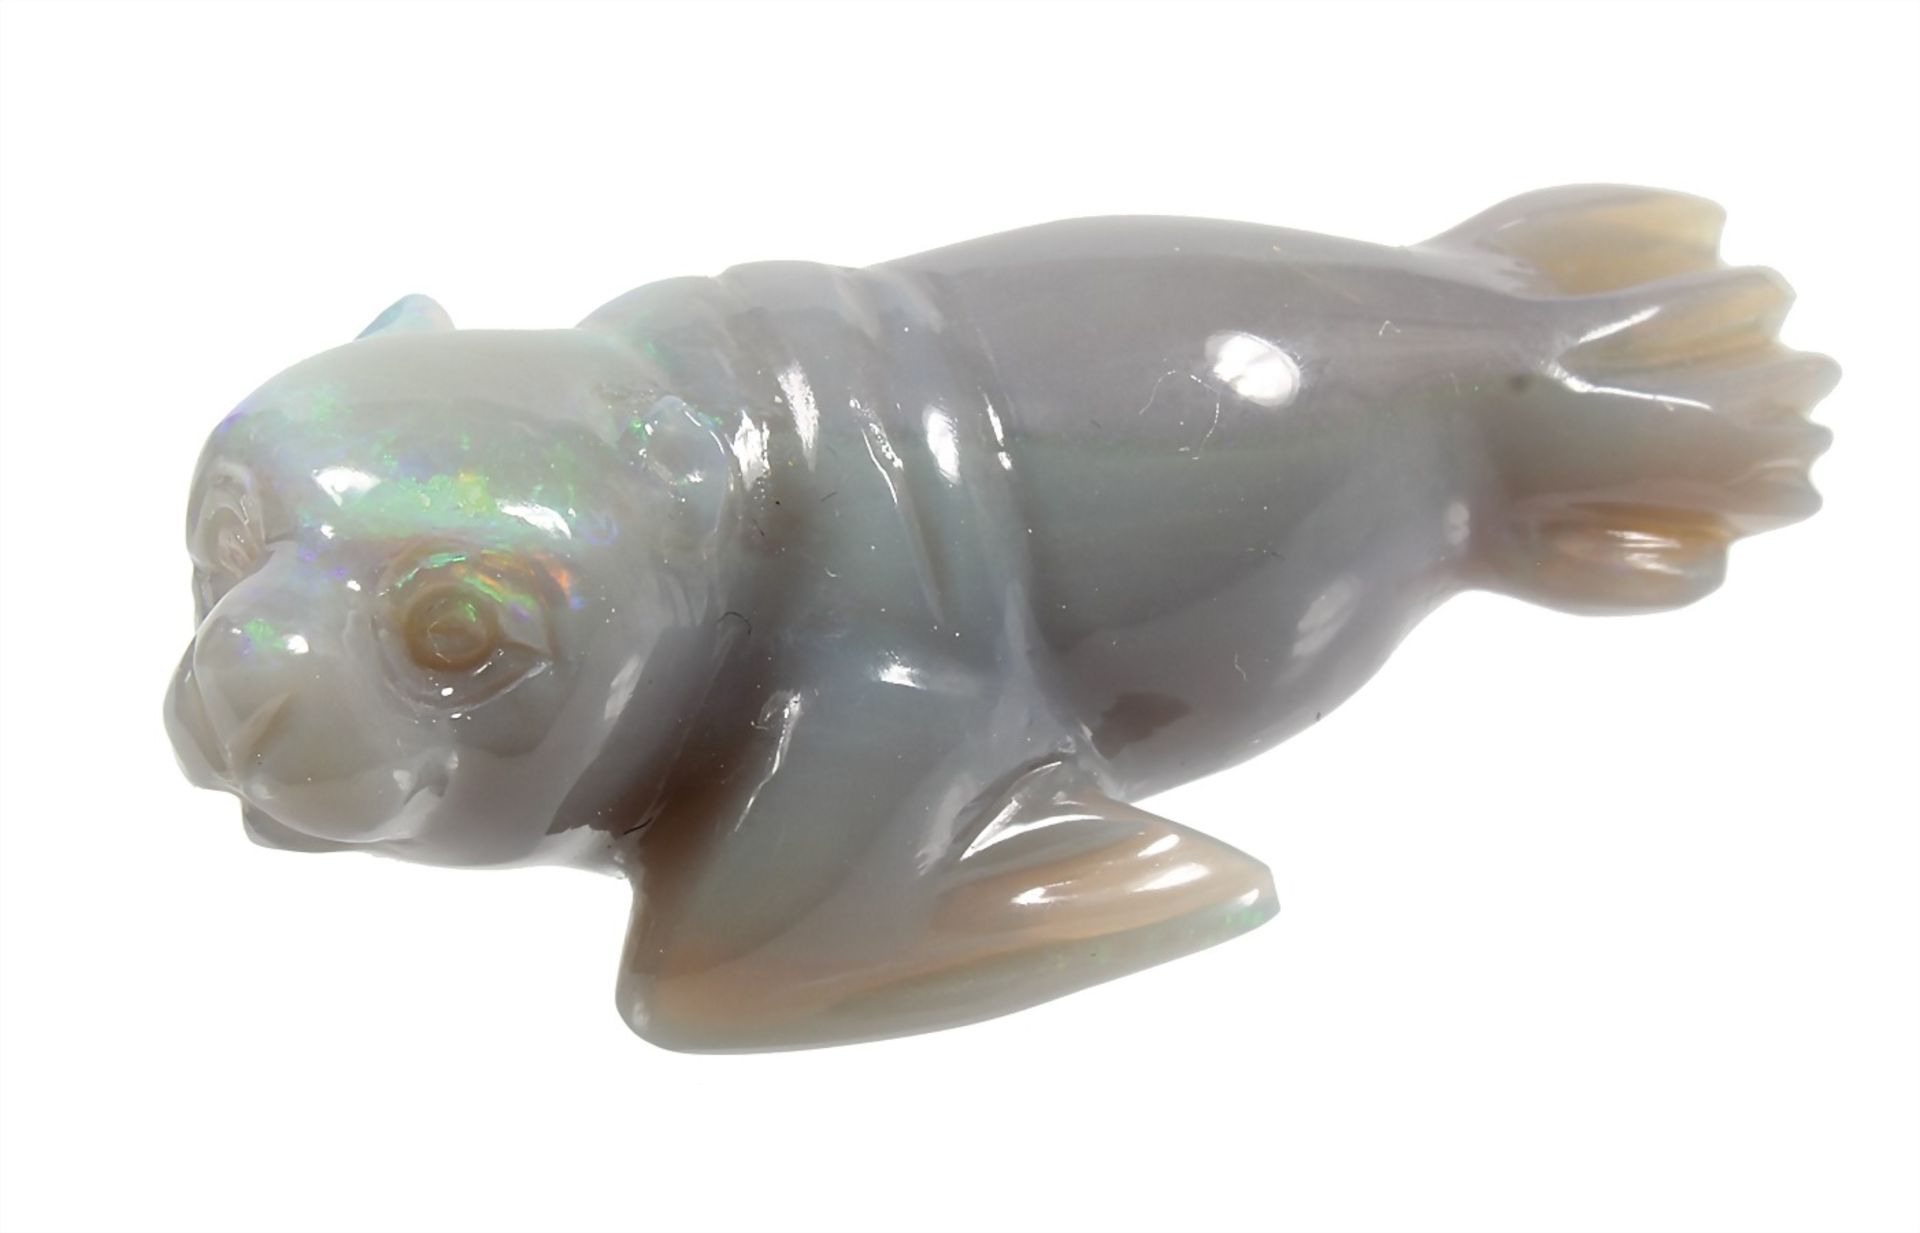 small plastic: seal, plastic engraved opal, c. 42.7 x 17.5 x 14.7 mm, total 8.8 g (44.0 ct)